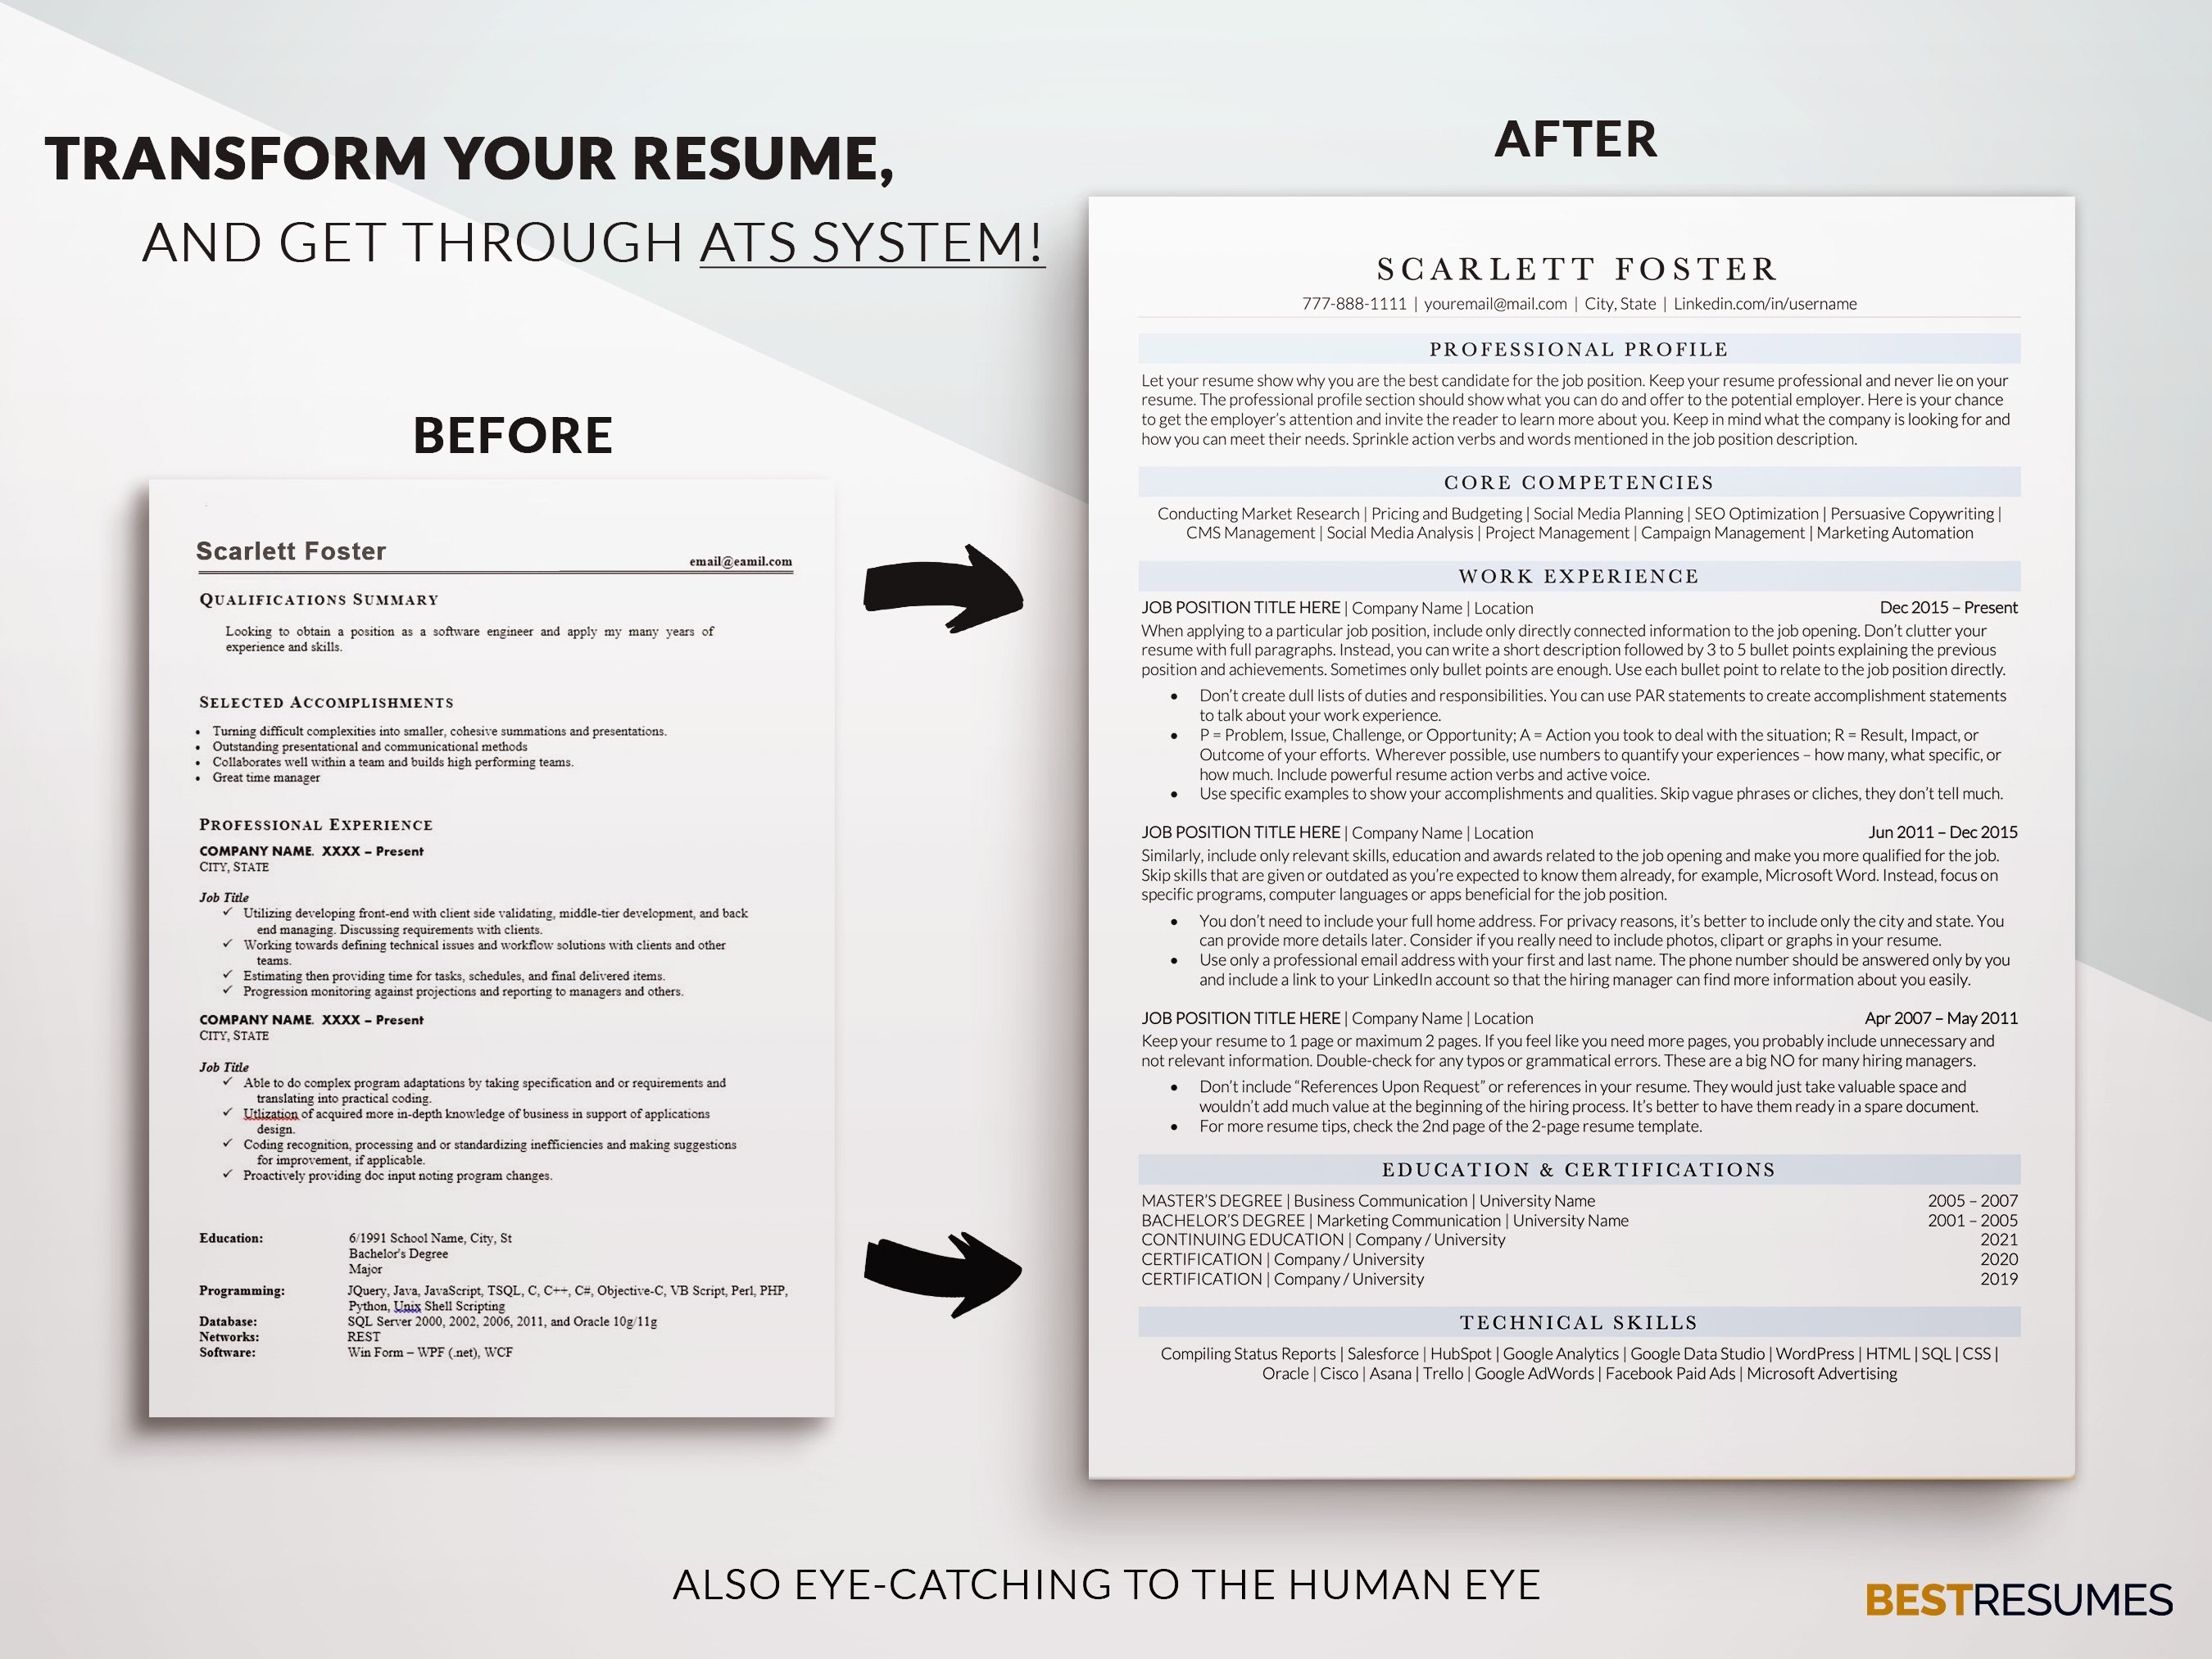 ats friendly executive resume template transform your resume scarlett foster 736